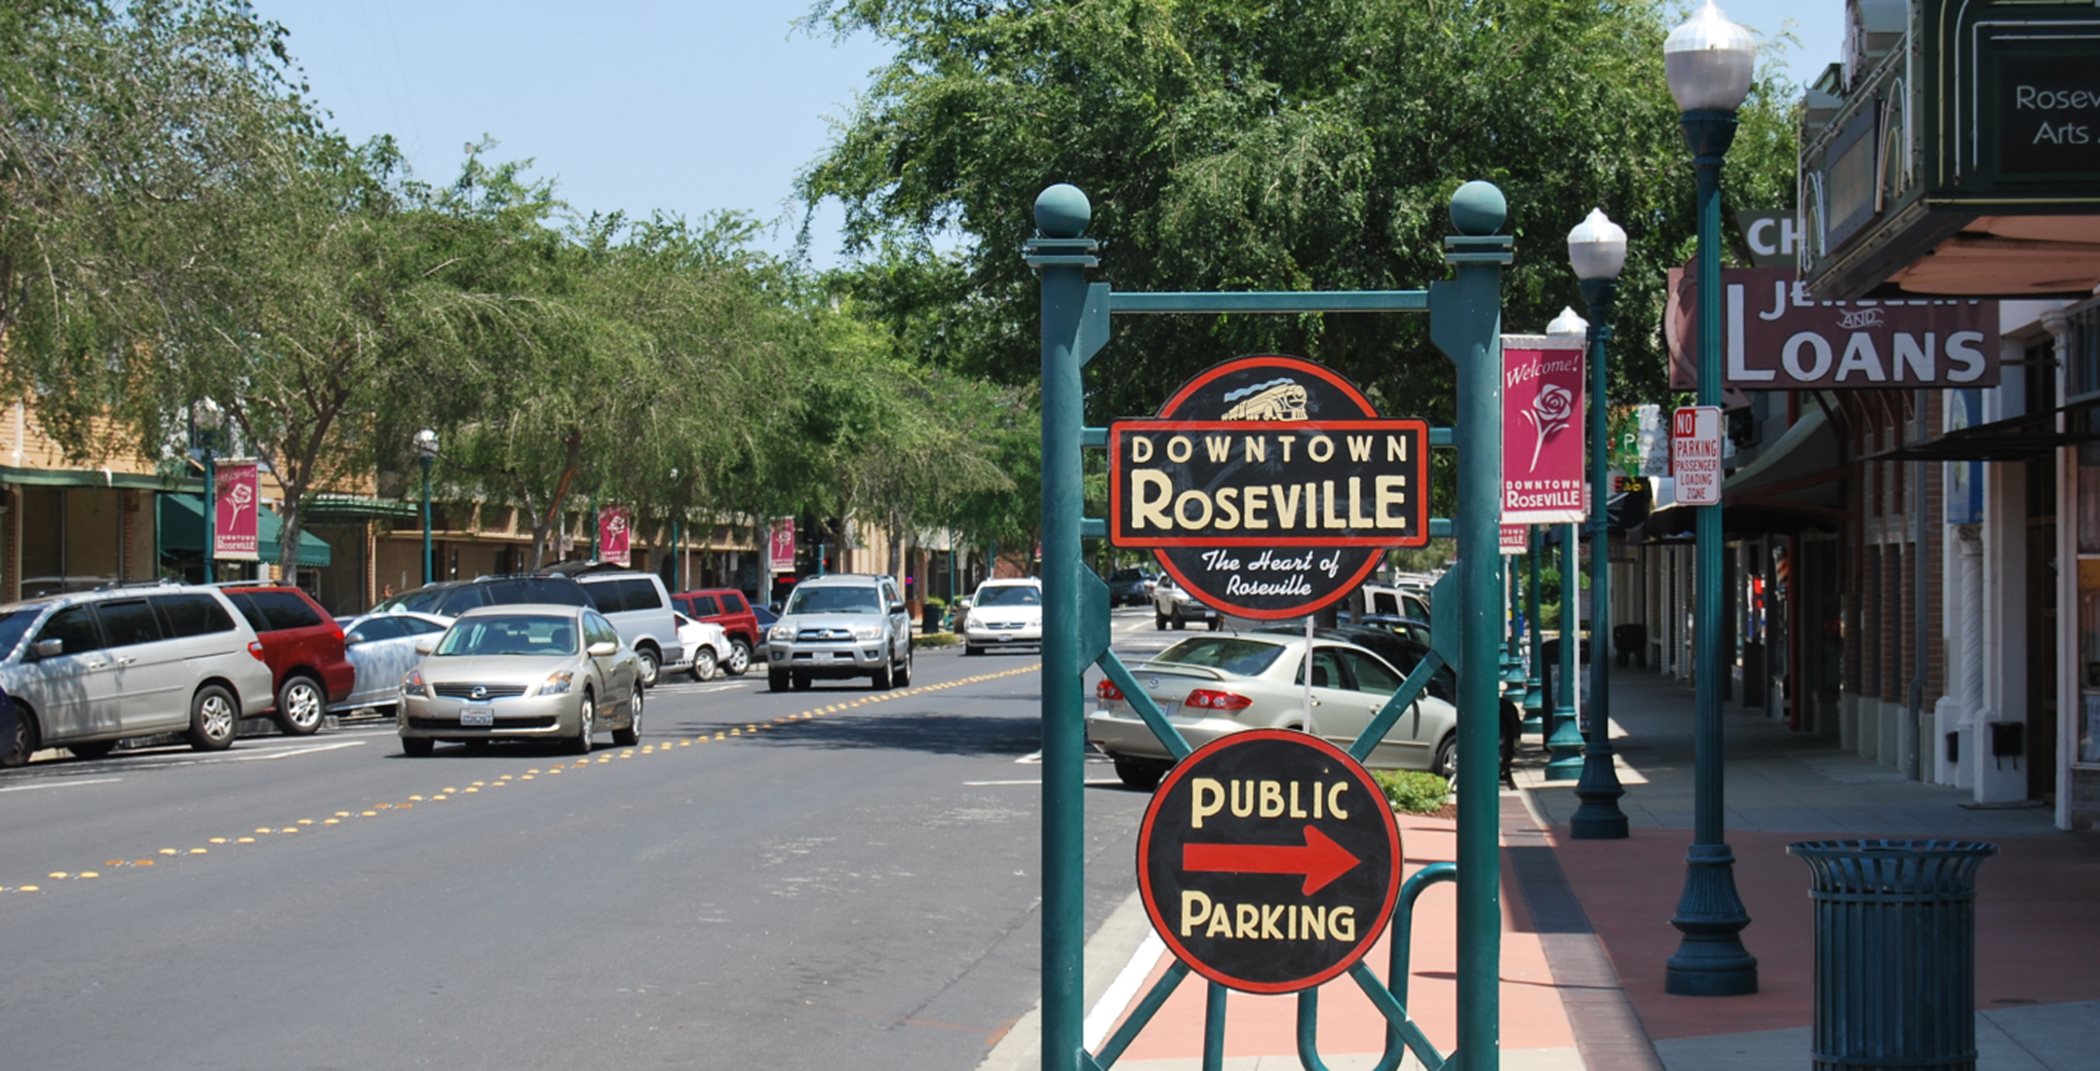 Downtown Roseville street view